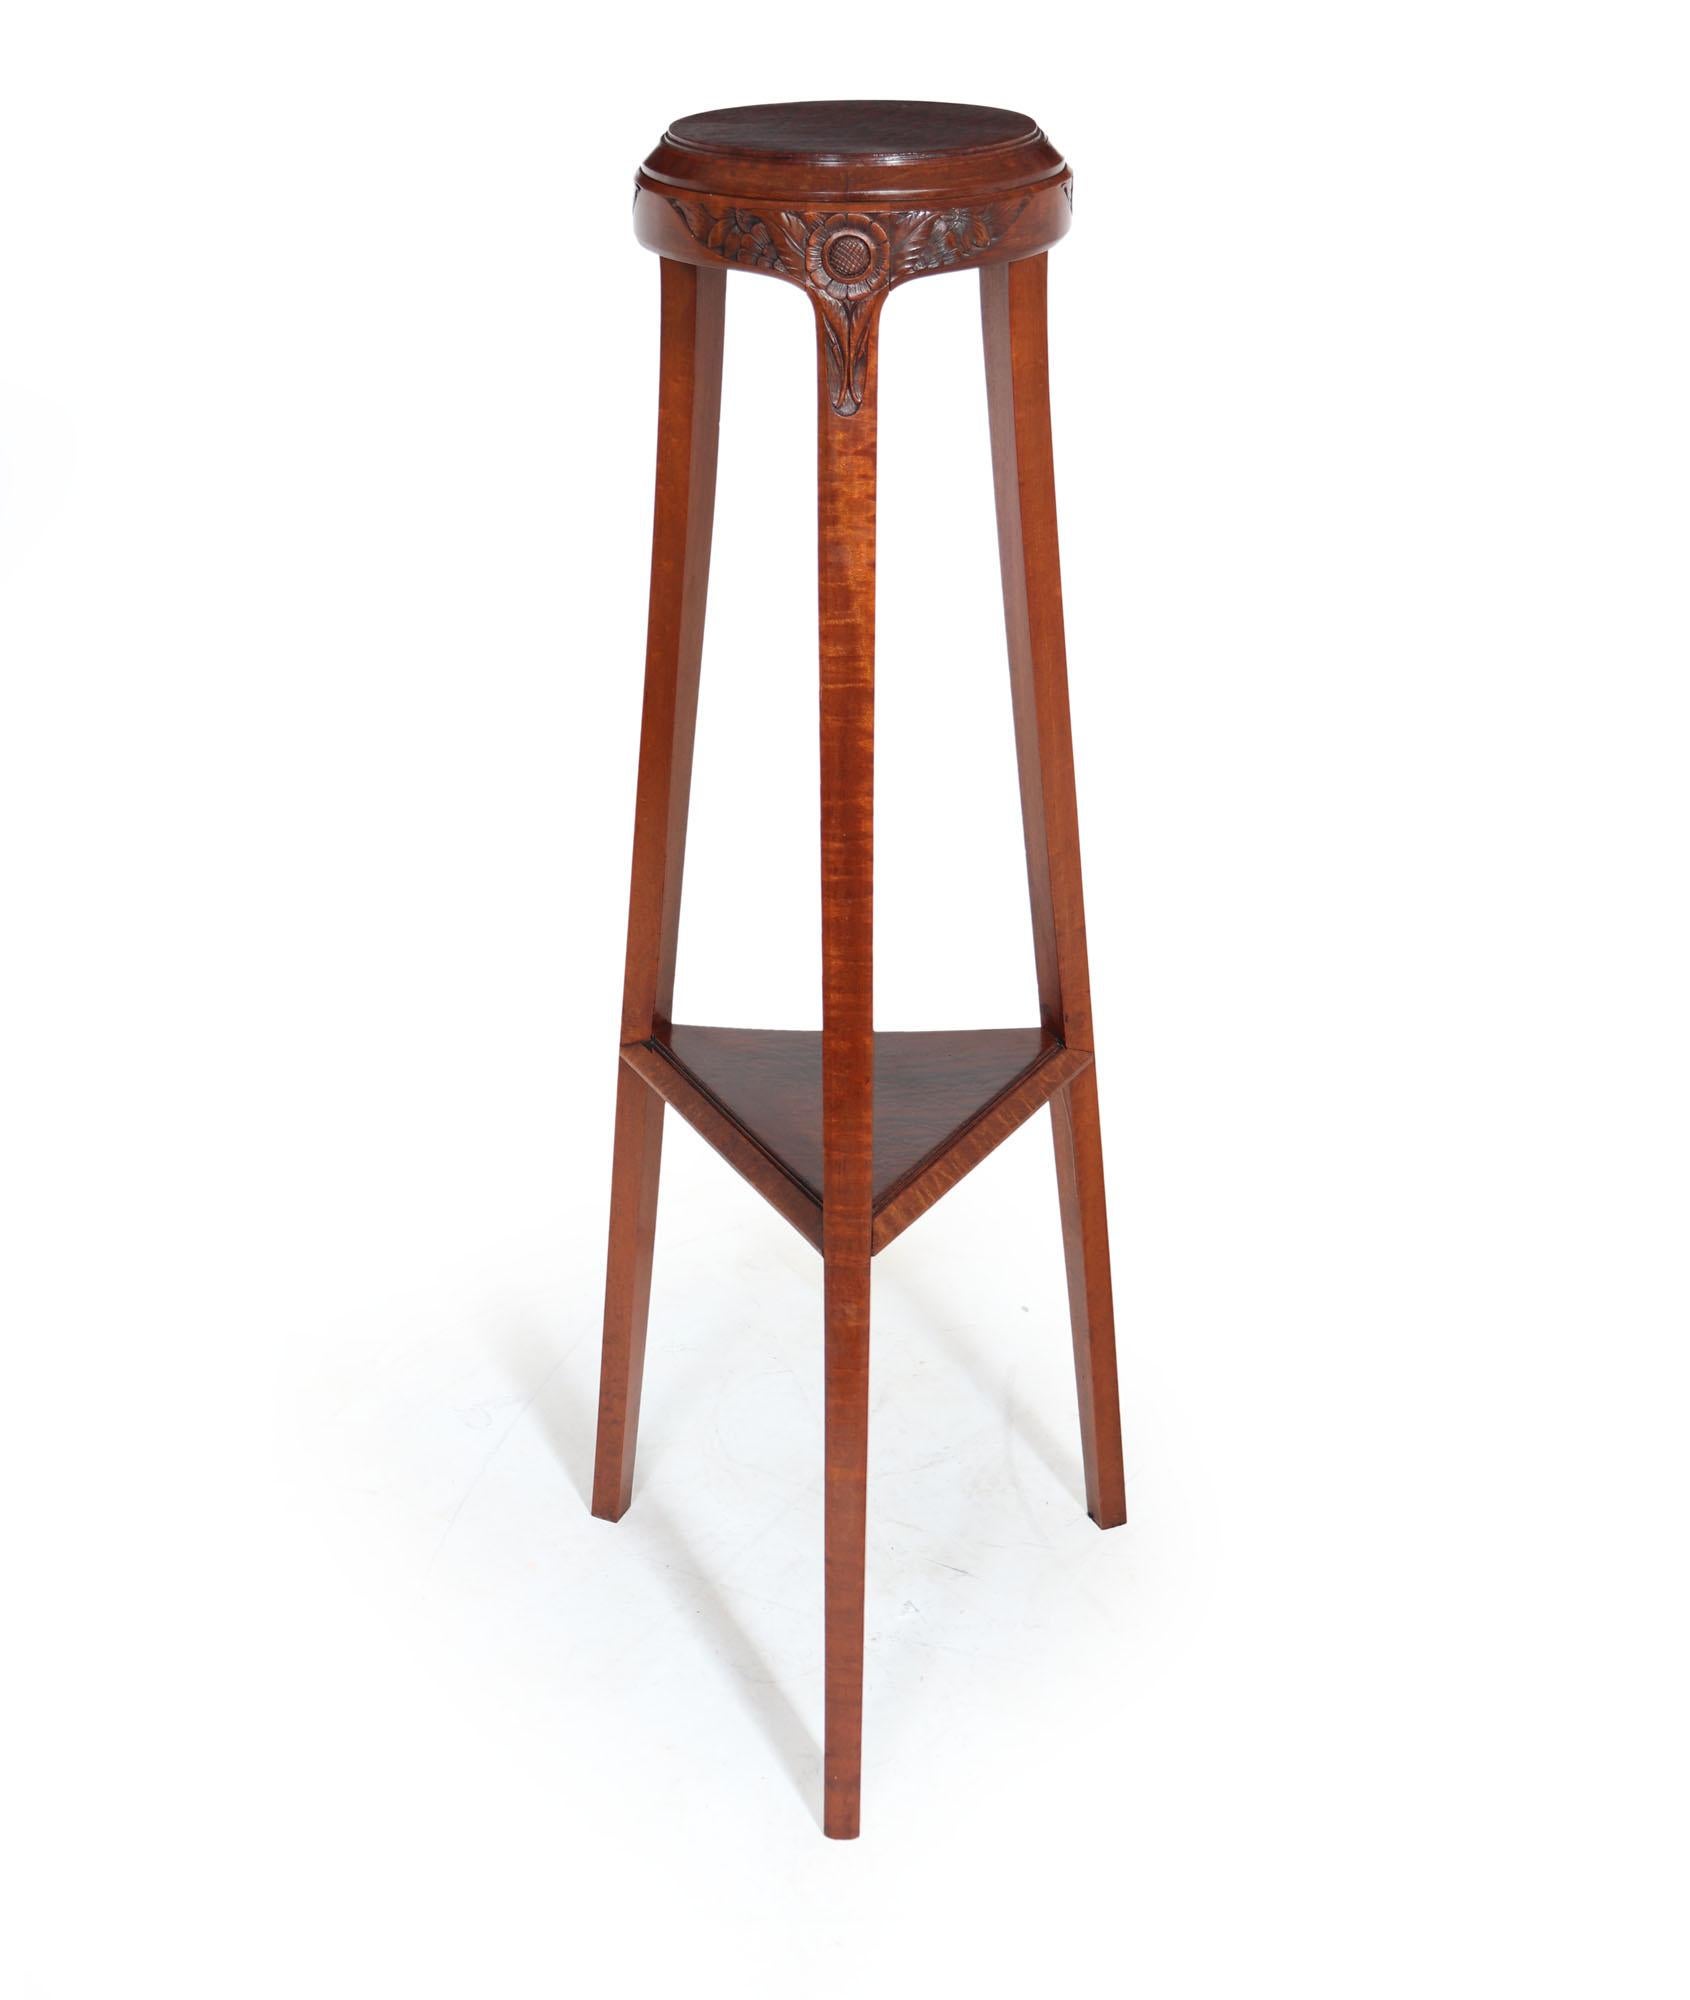 Early 20th Century French Art Deco Plant Stand by Paul Follot, c1925 For Sale